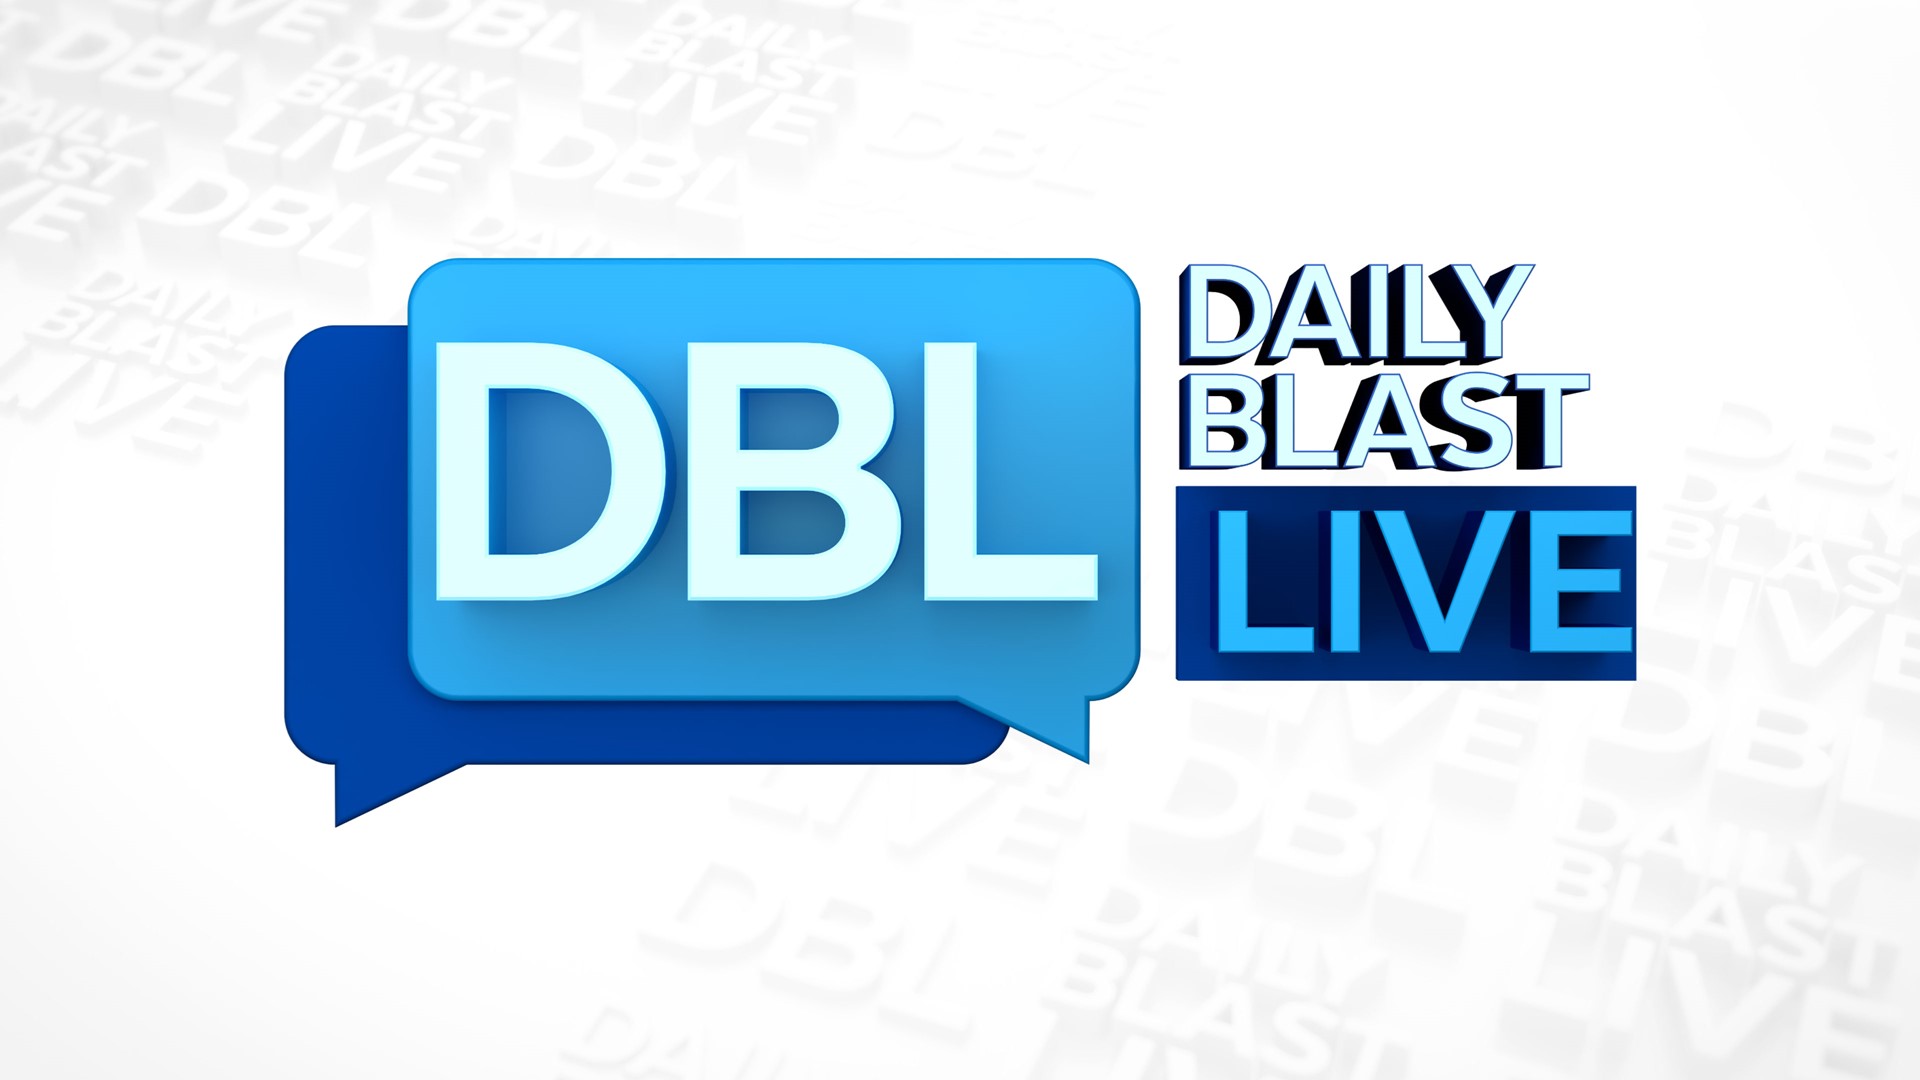 DBL’s multi-platform brand will bring the latest trending stories to viewers with broadcast & digital teams delivering a fun and exciting half hour to viewers.